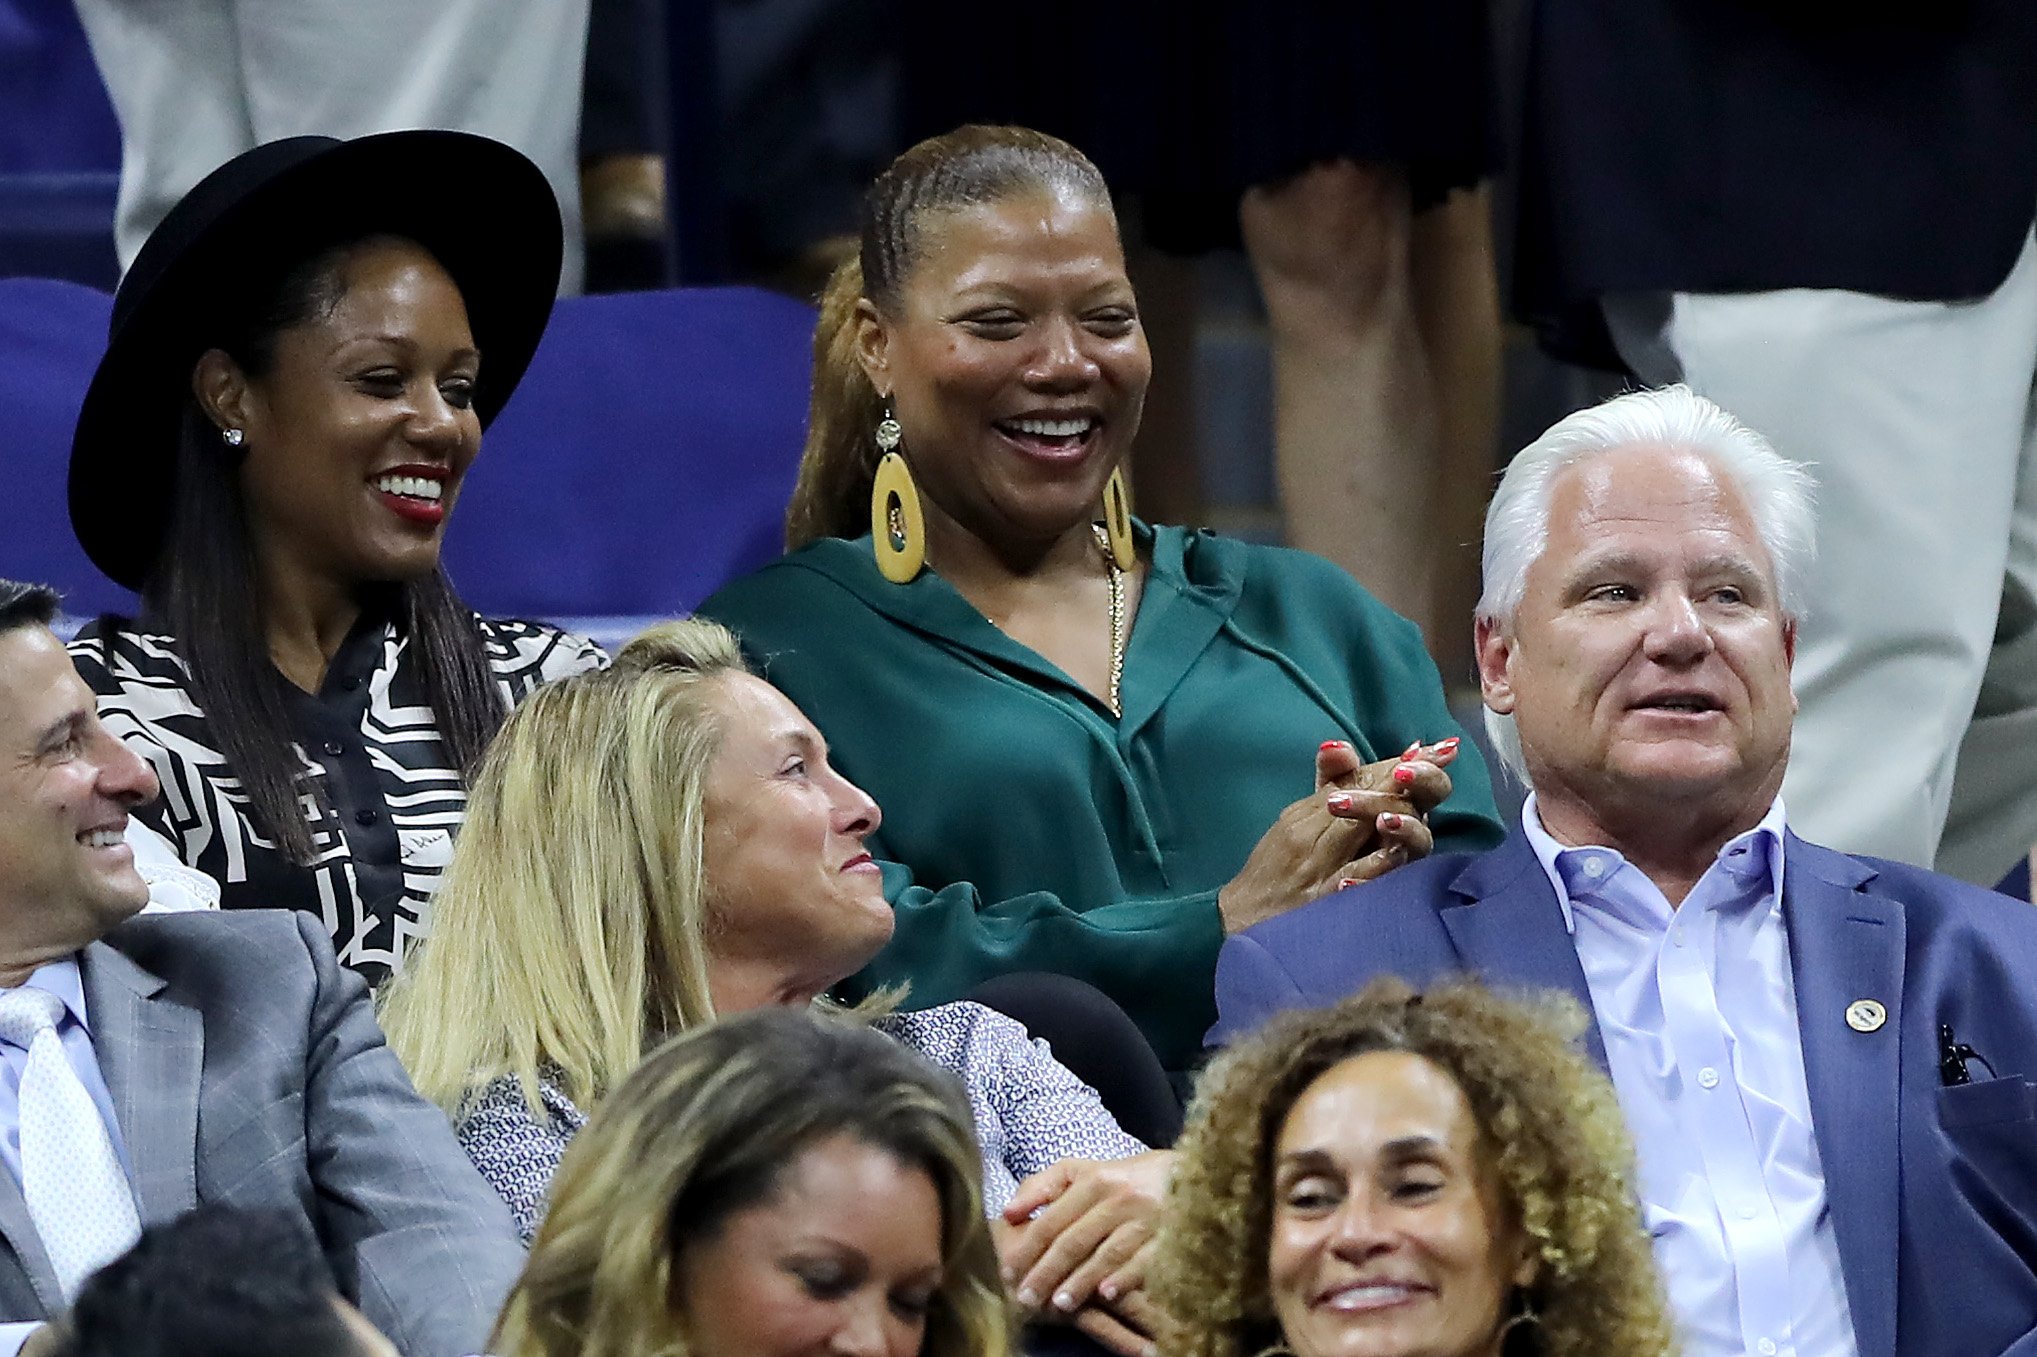 Queen Latifah and Eboni Nichols at the US Open Day 11 | Getty Images / GlobalImagesUkraine